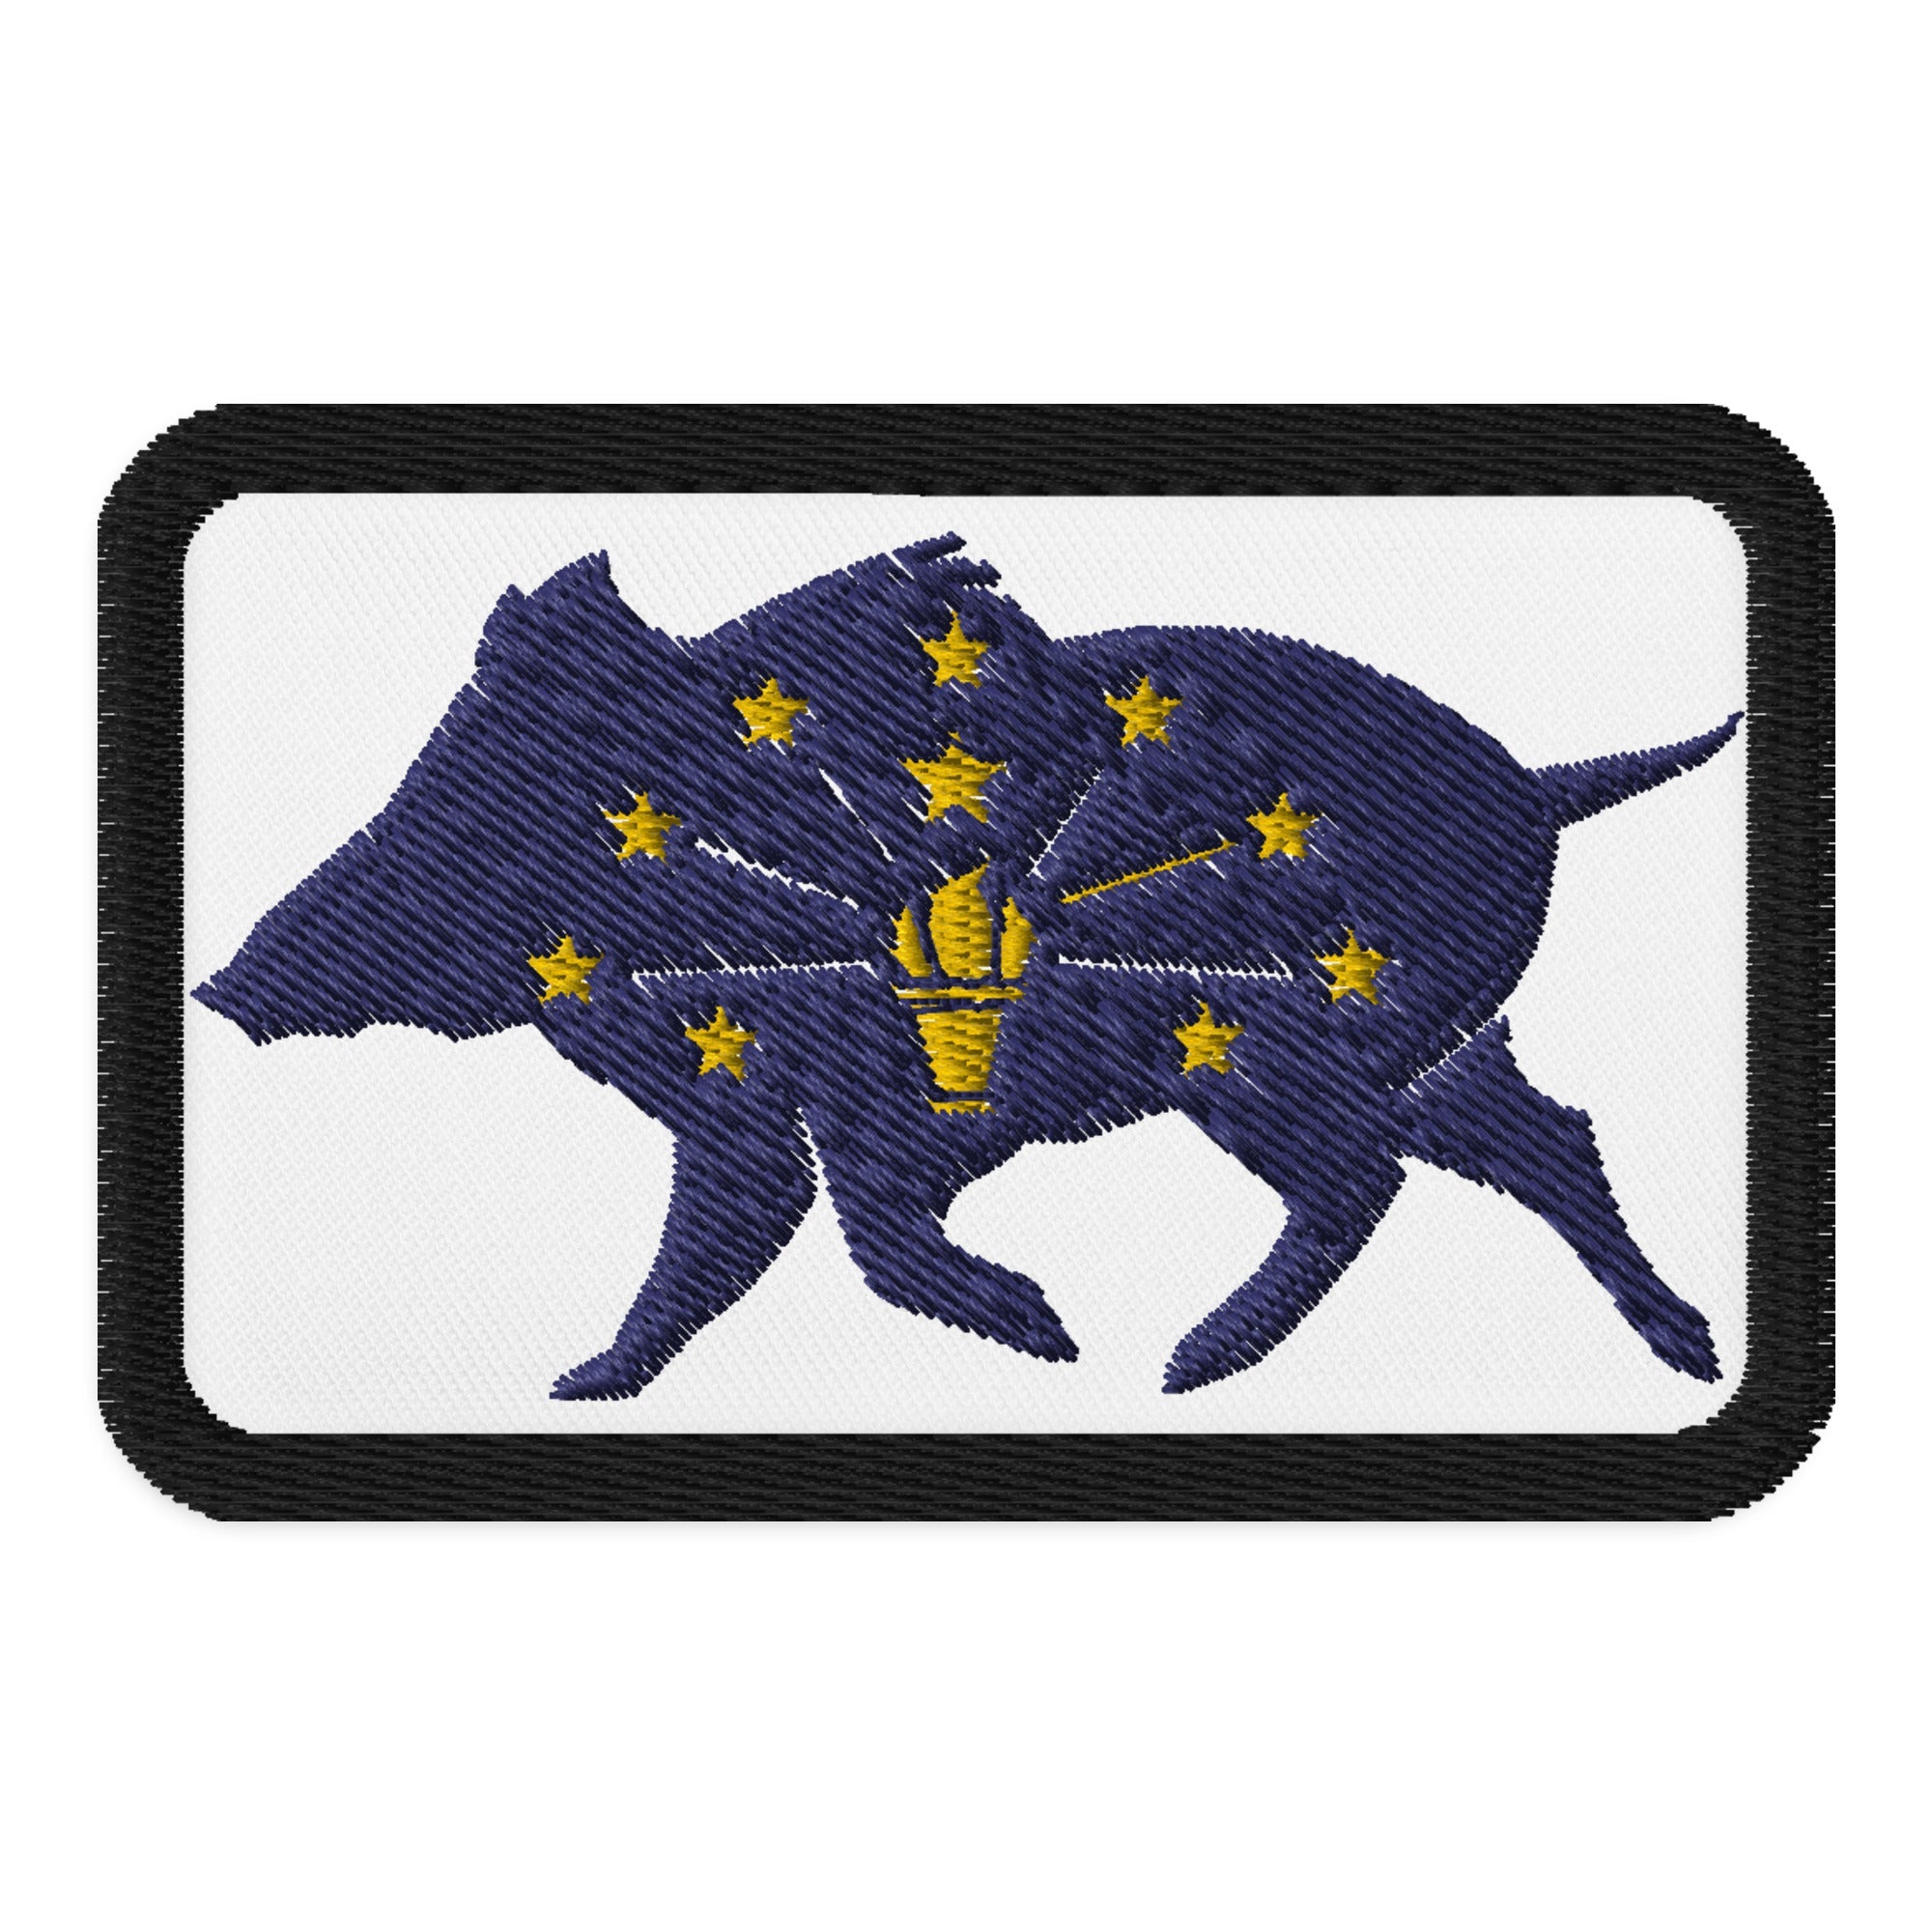 Indiana Boar Patch - Wilding Life